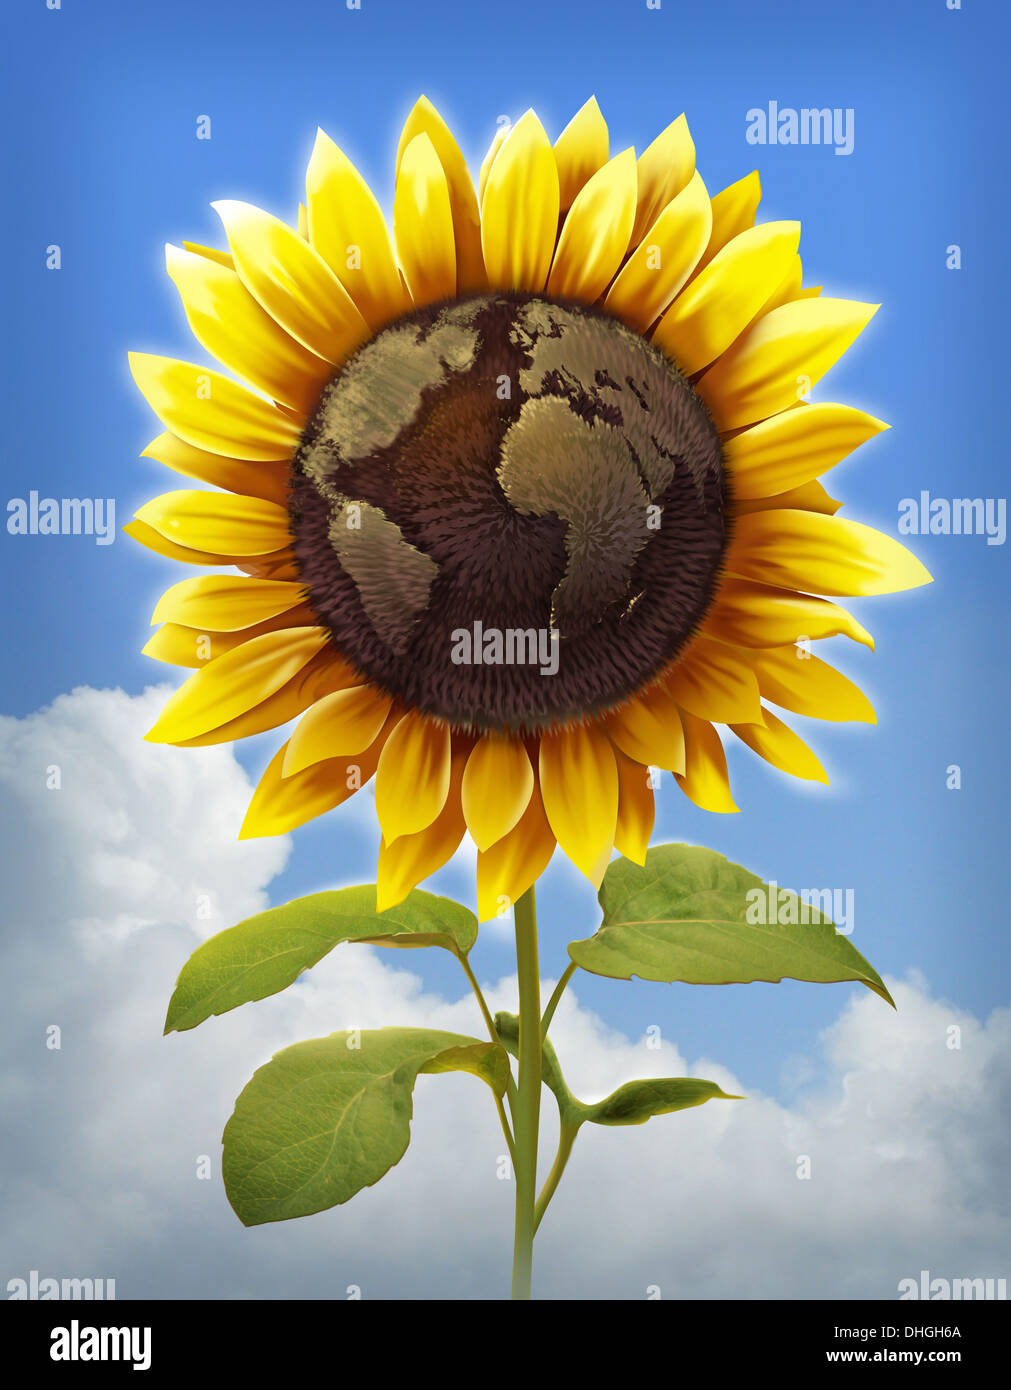 Illustrative image of sunflower with globe imprint representing global care Stock Photo